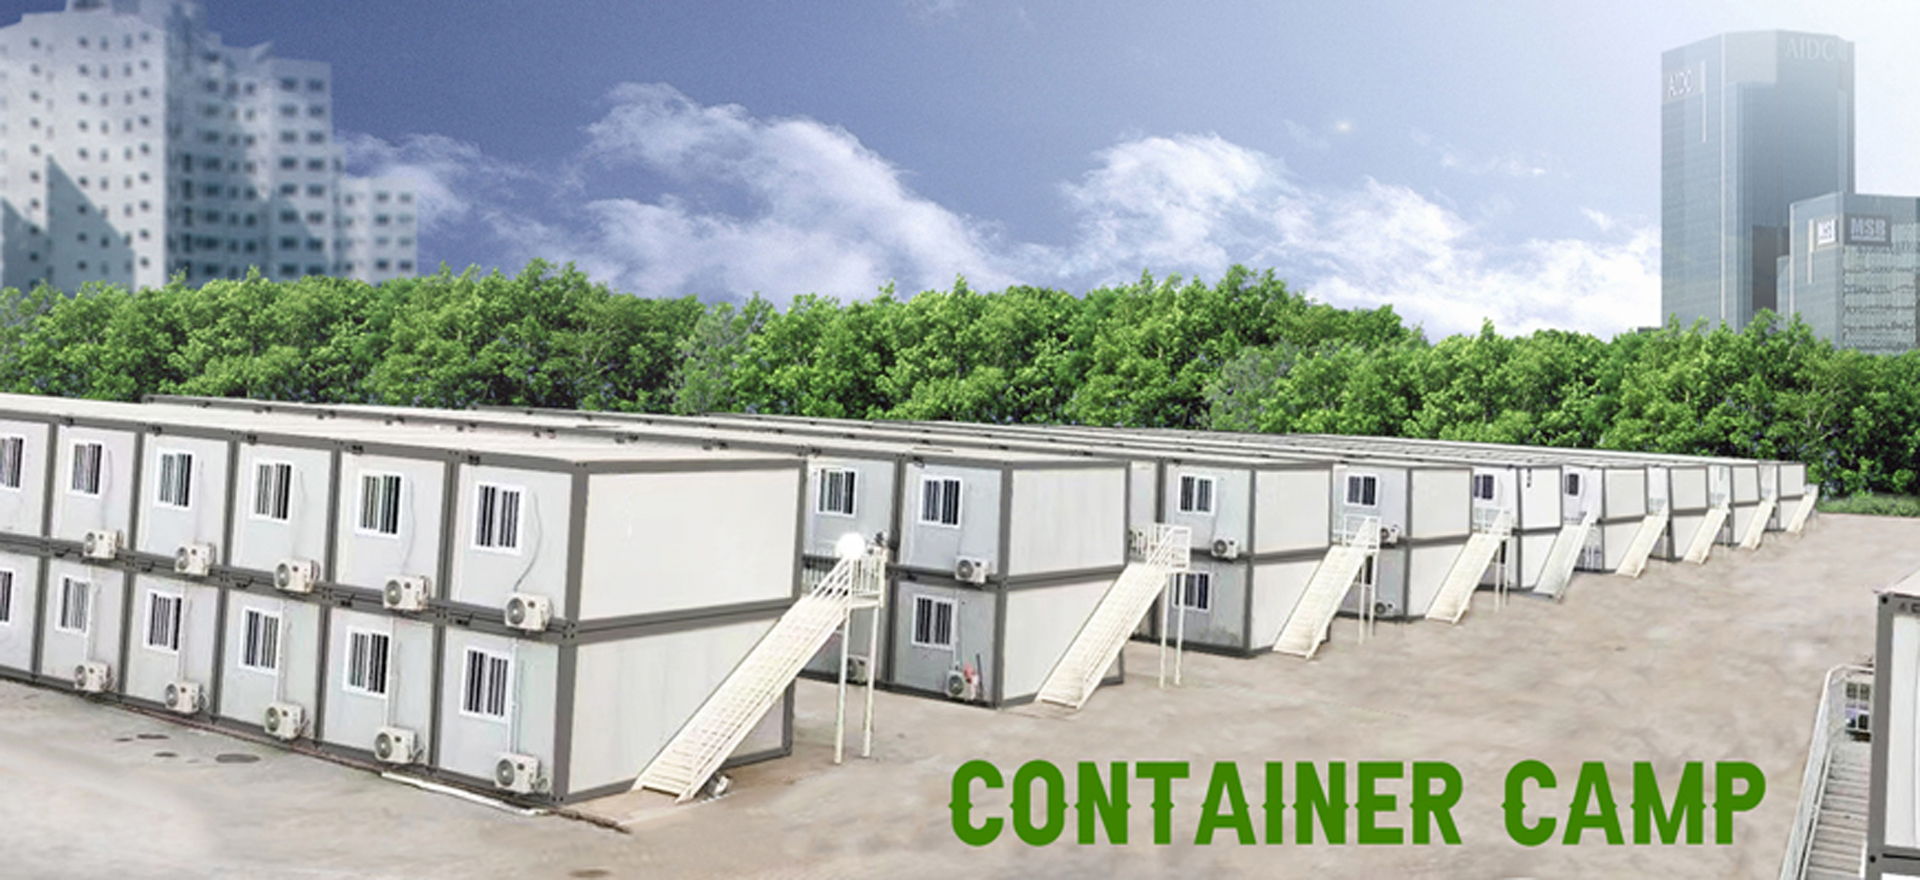 Container camp